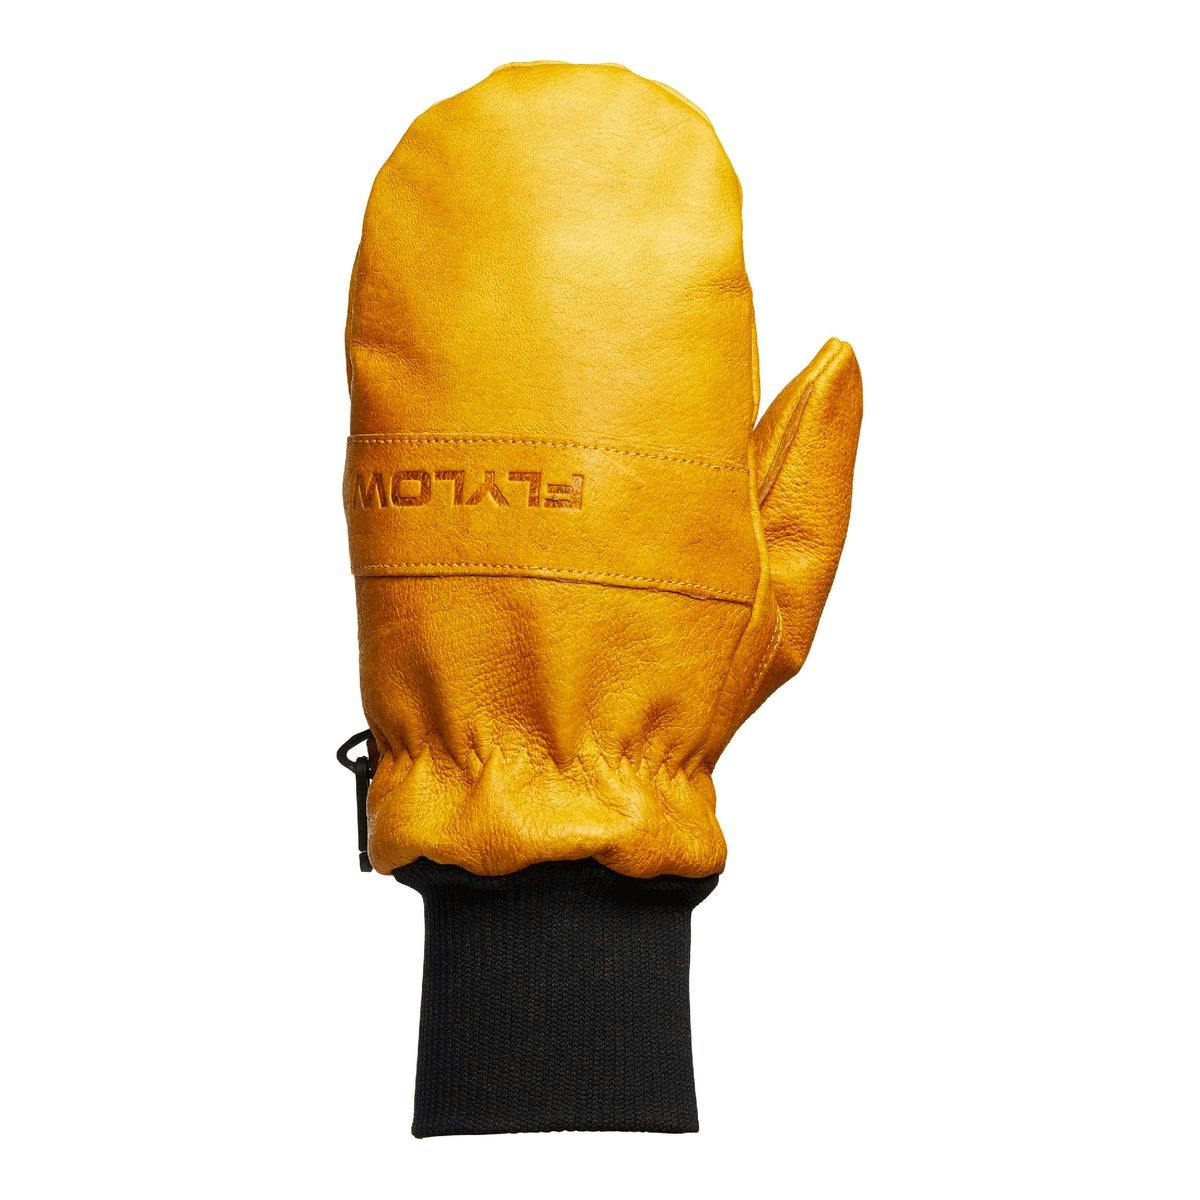 Flylow Oven Insulated Mittens